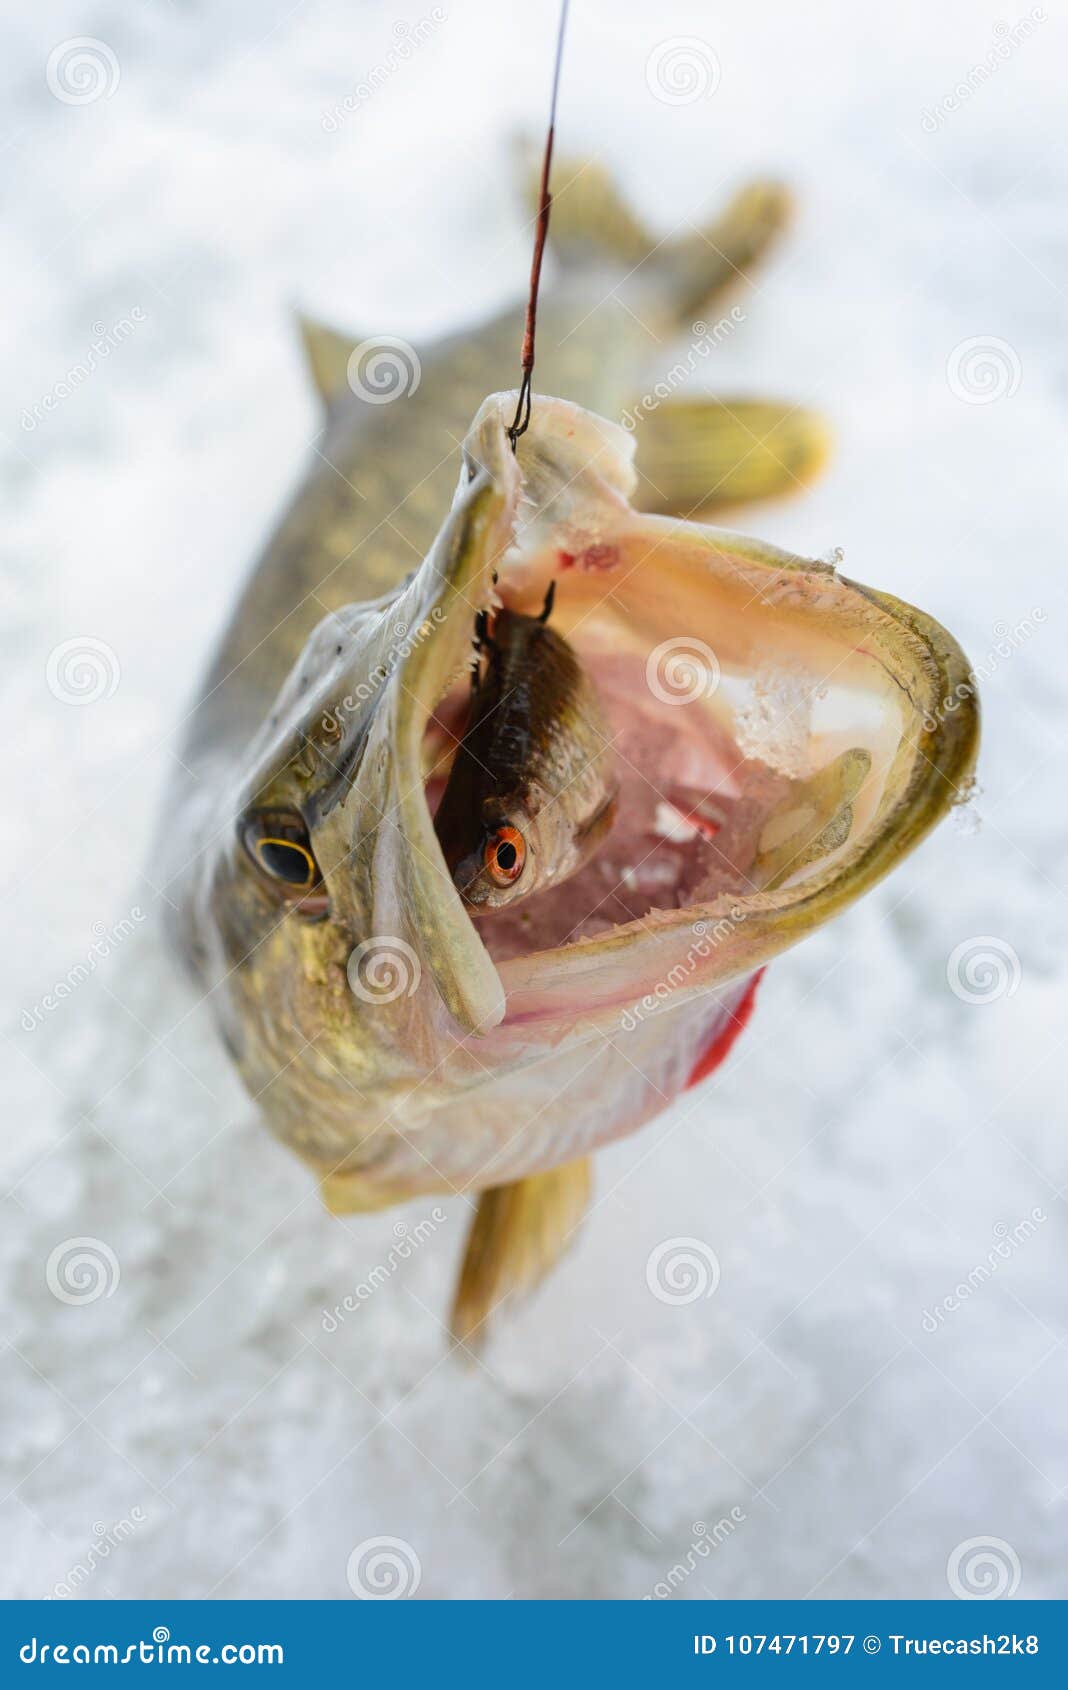 Just Caught Pike with Small Bait Fish in Its Mouth, Ice Winter Fishing  Stock Image - Image of catch, frozen: 107471797